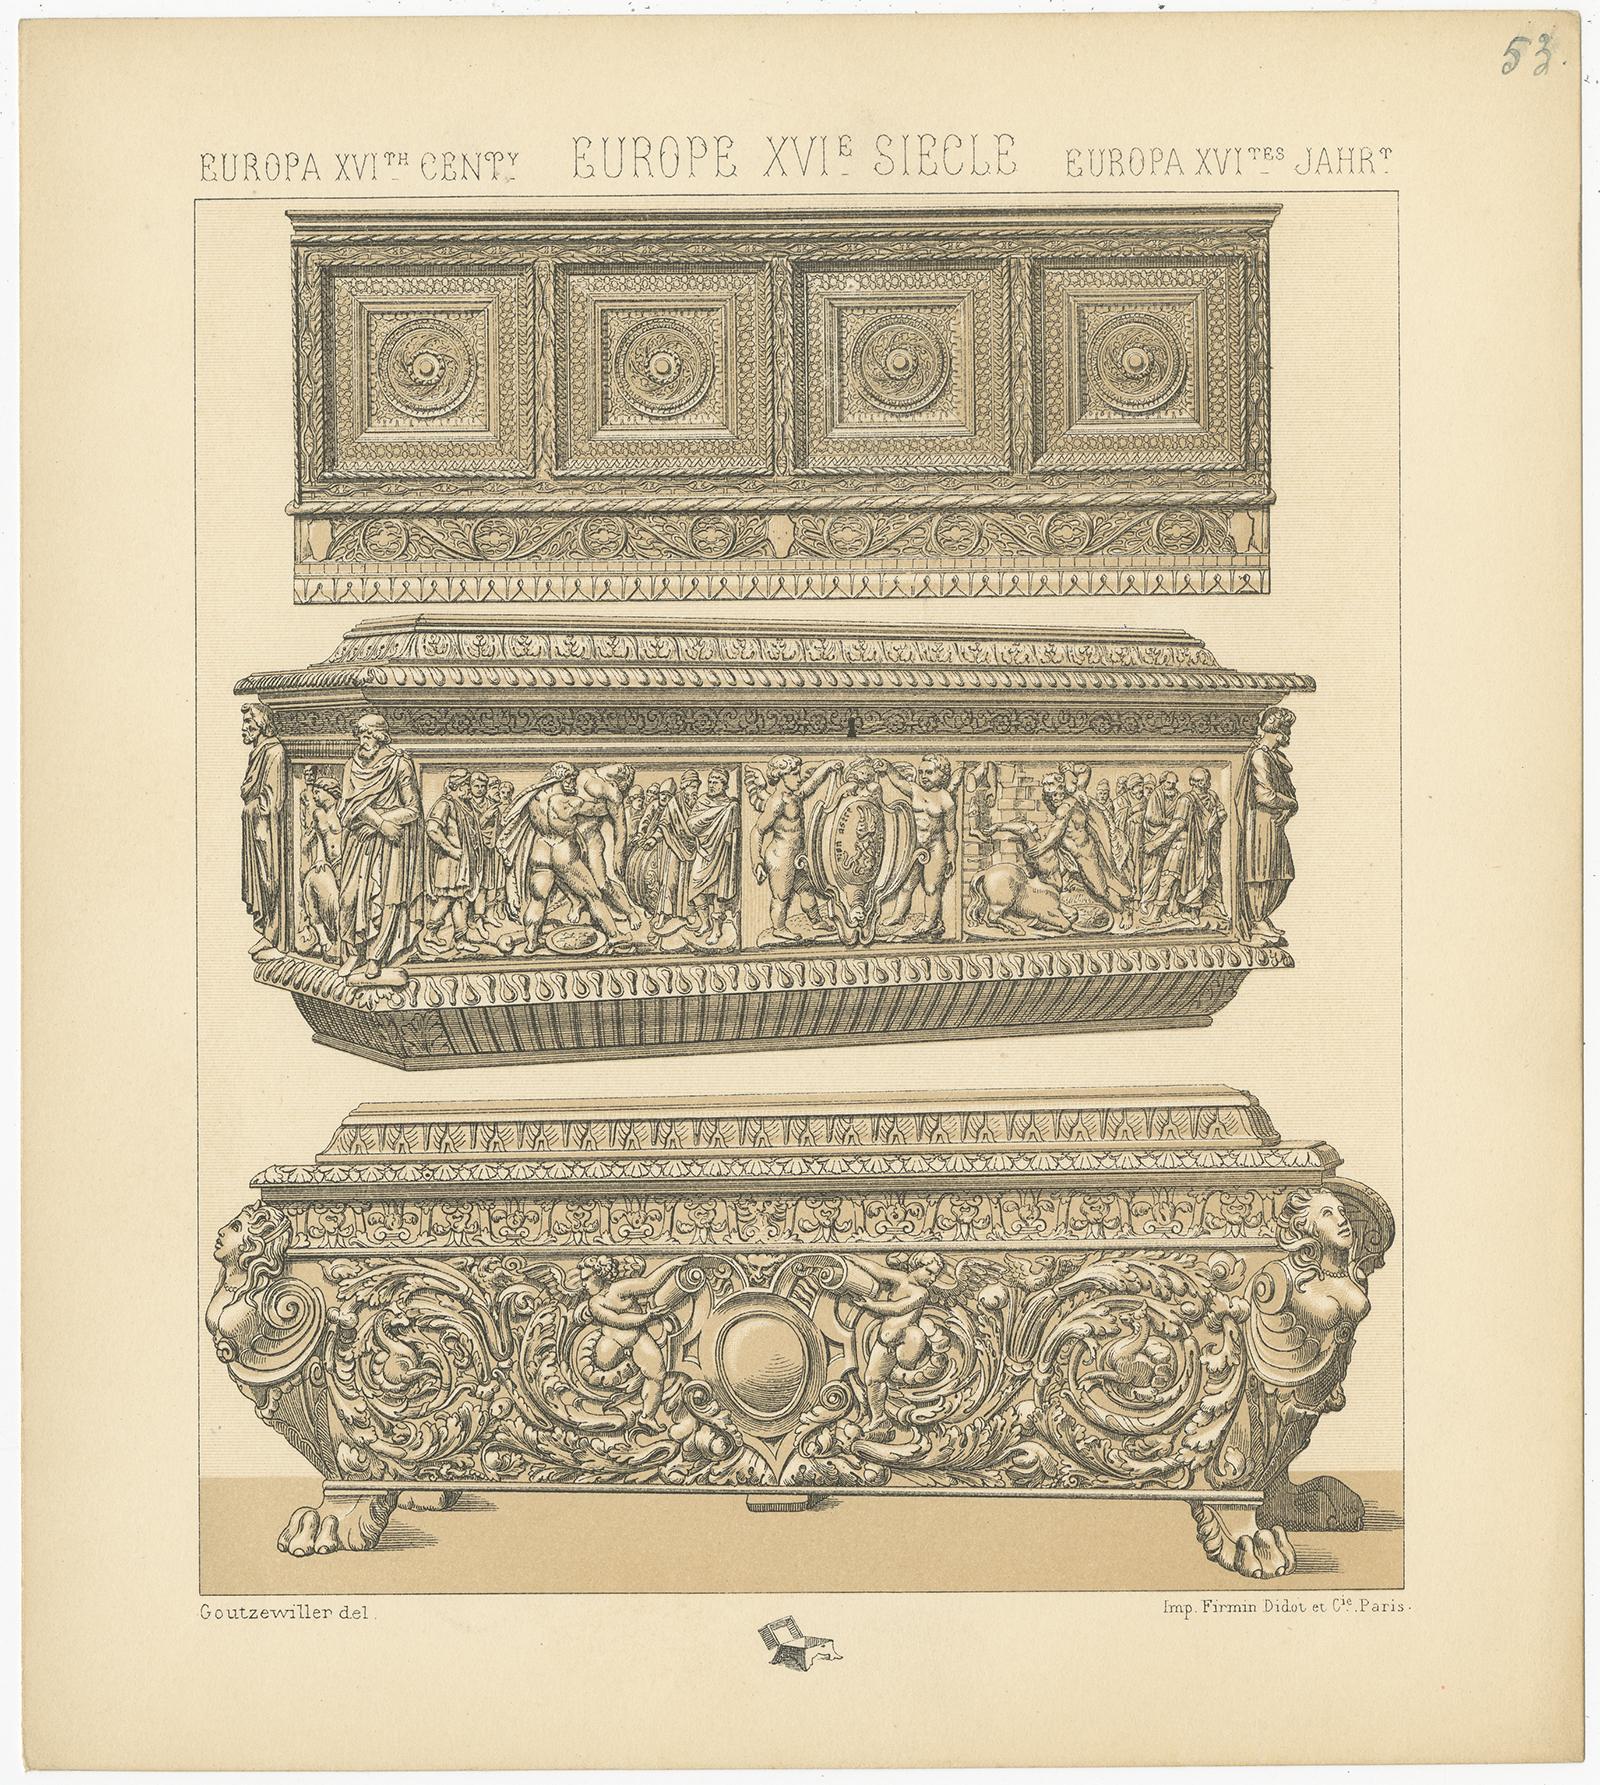 Antique print titled 'Europa XVIth Cent - Europe XVIe, Siecle - Europa XVItes Jahr'. Chromolithograph of European 16th century furniture. This print originates from 'Le Costume Historique' by M.A. Racinet. Published circa 1880.